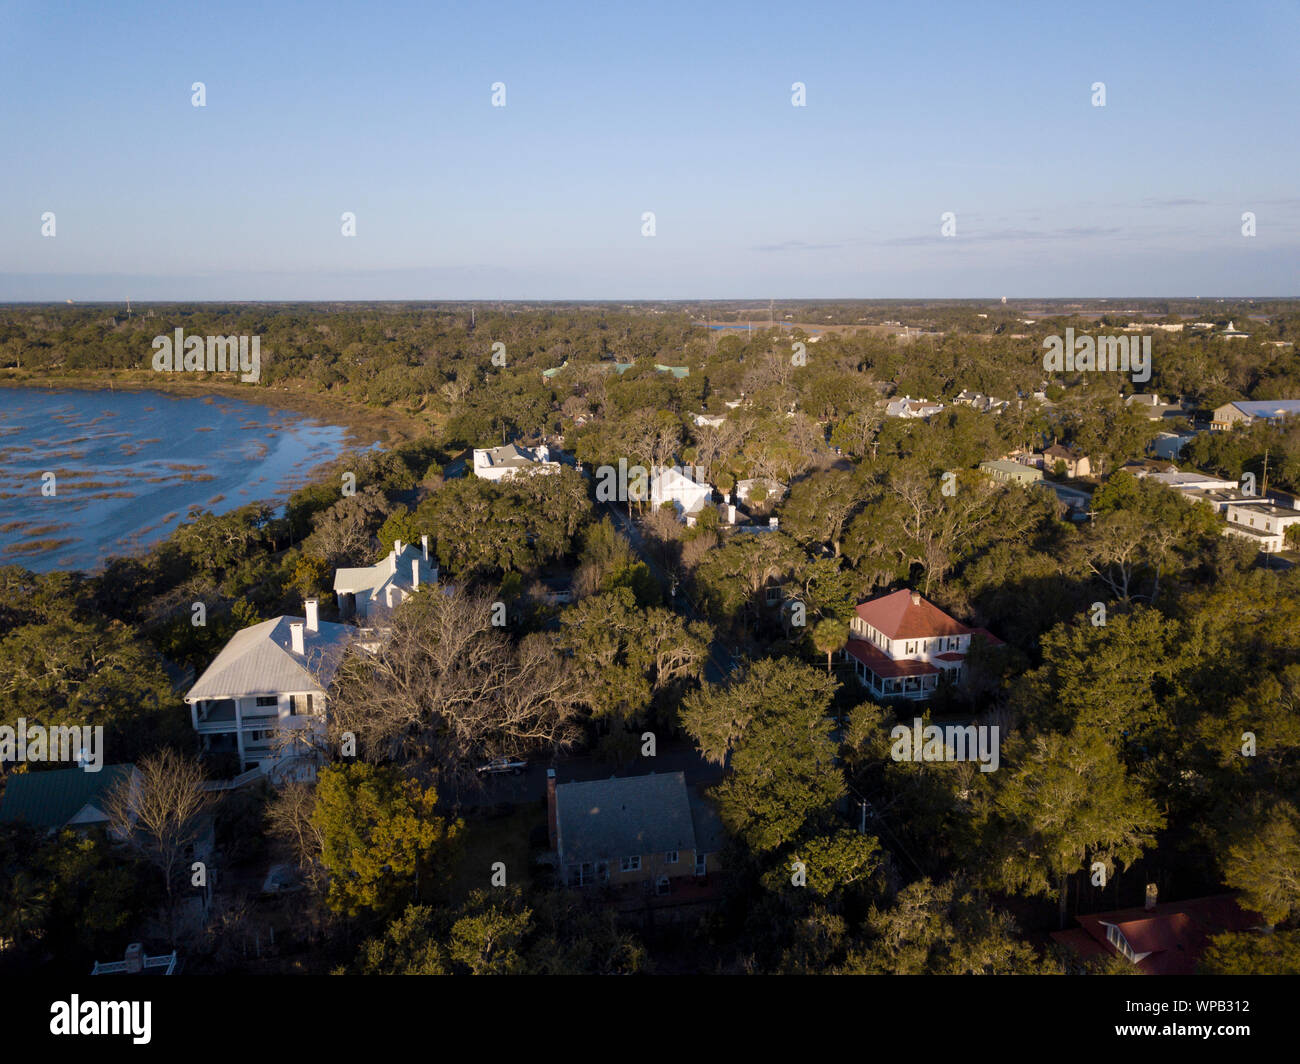 Aerial low angle view of historic town of Beaufort, South Carolina. Stock Photo